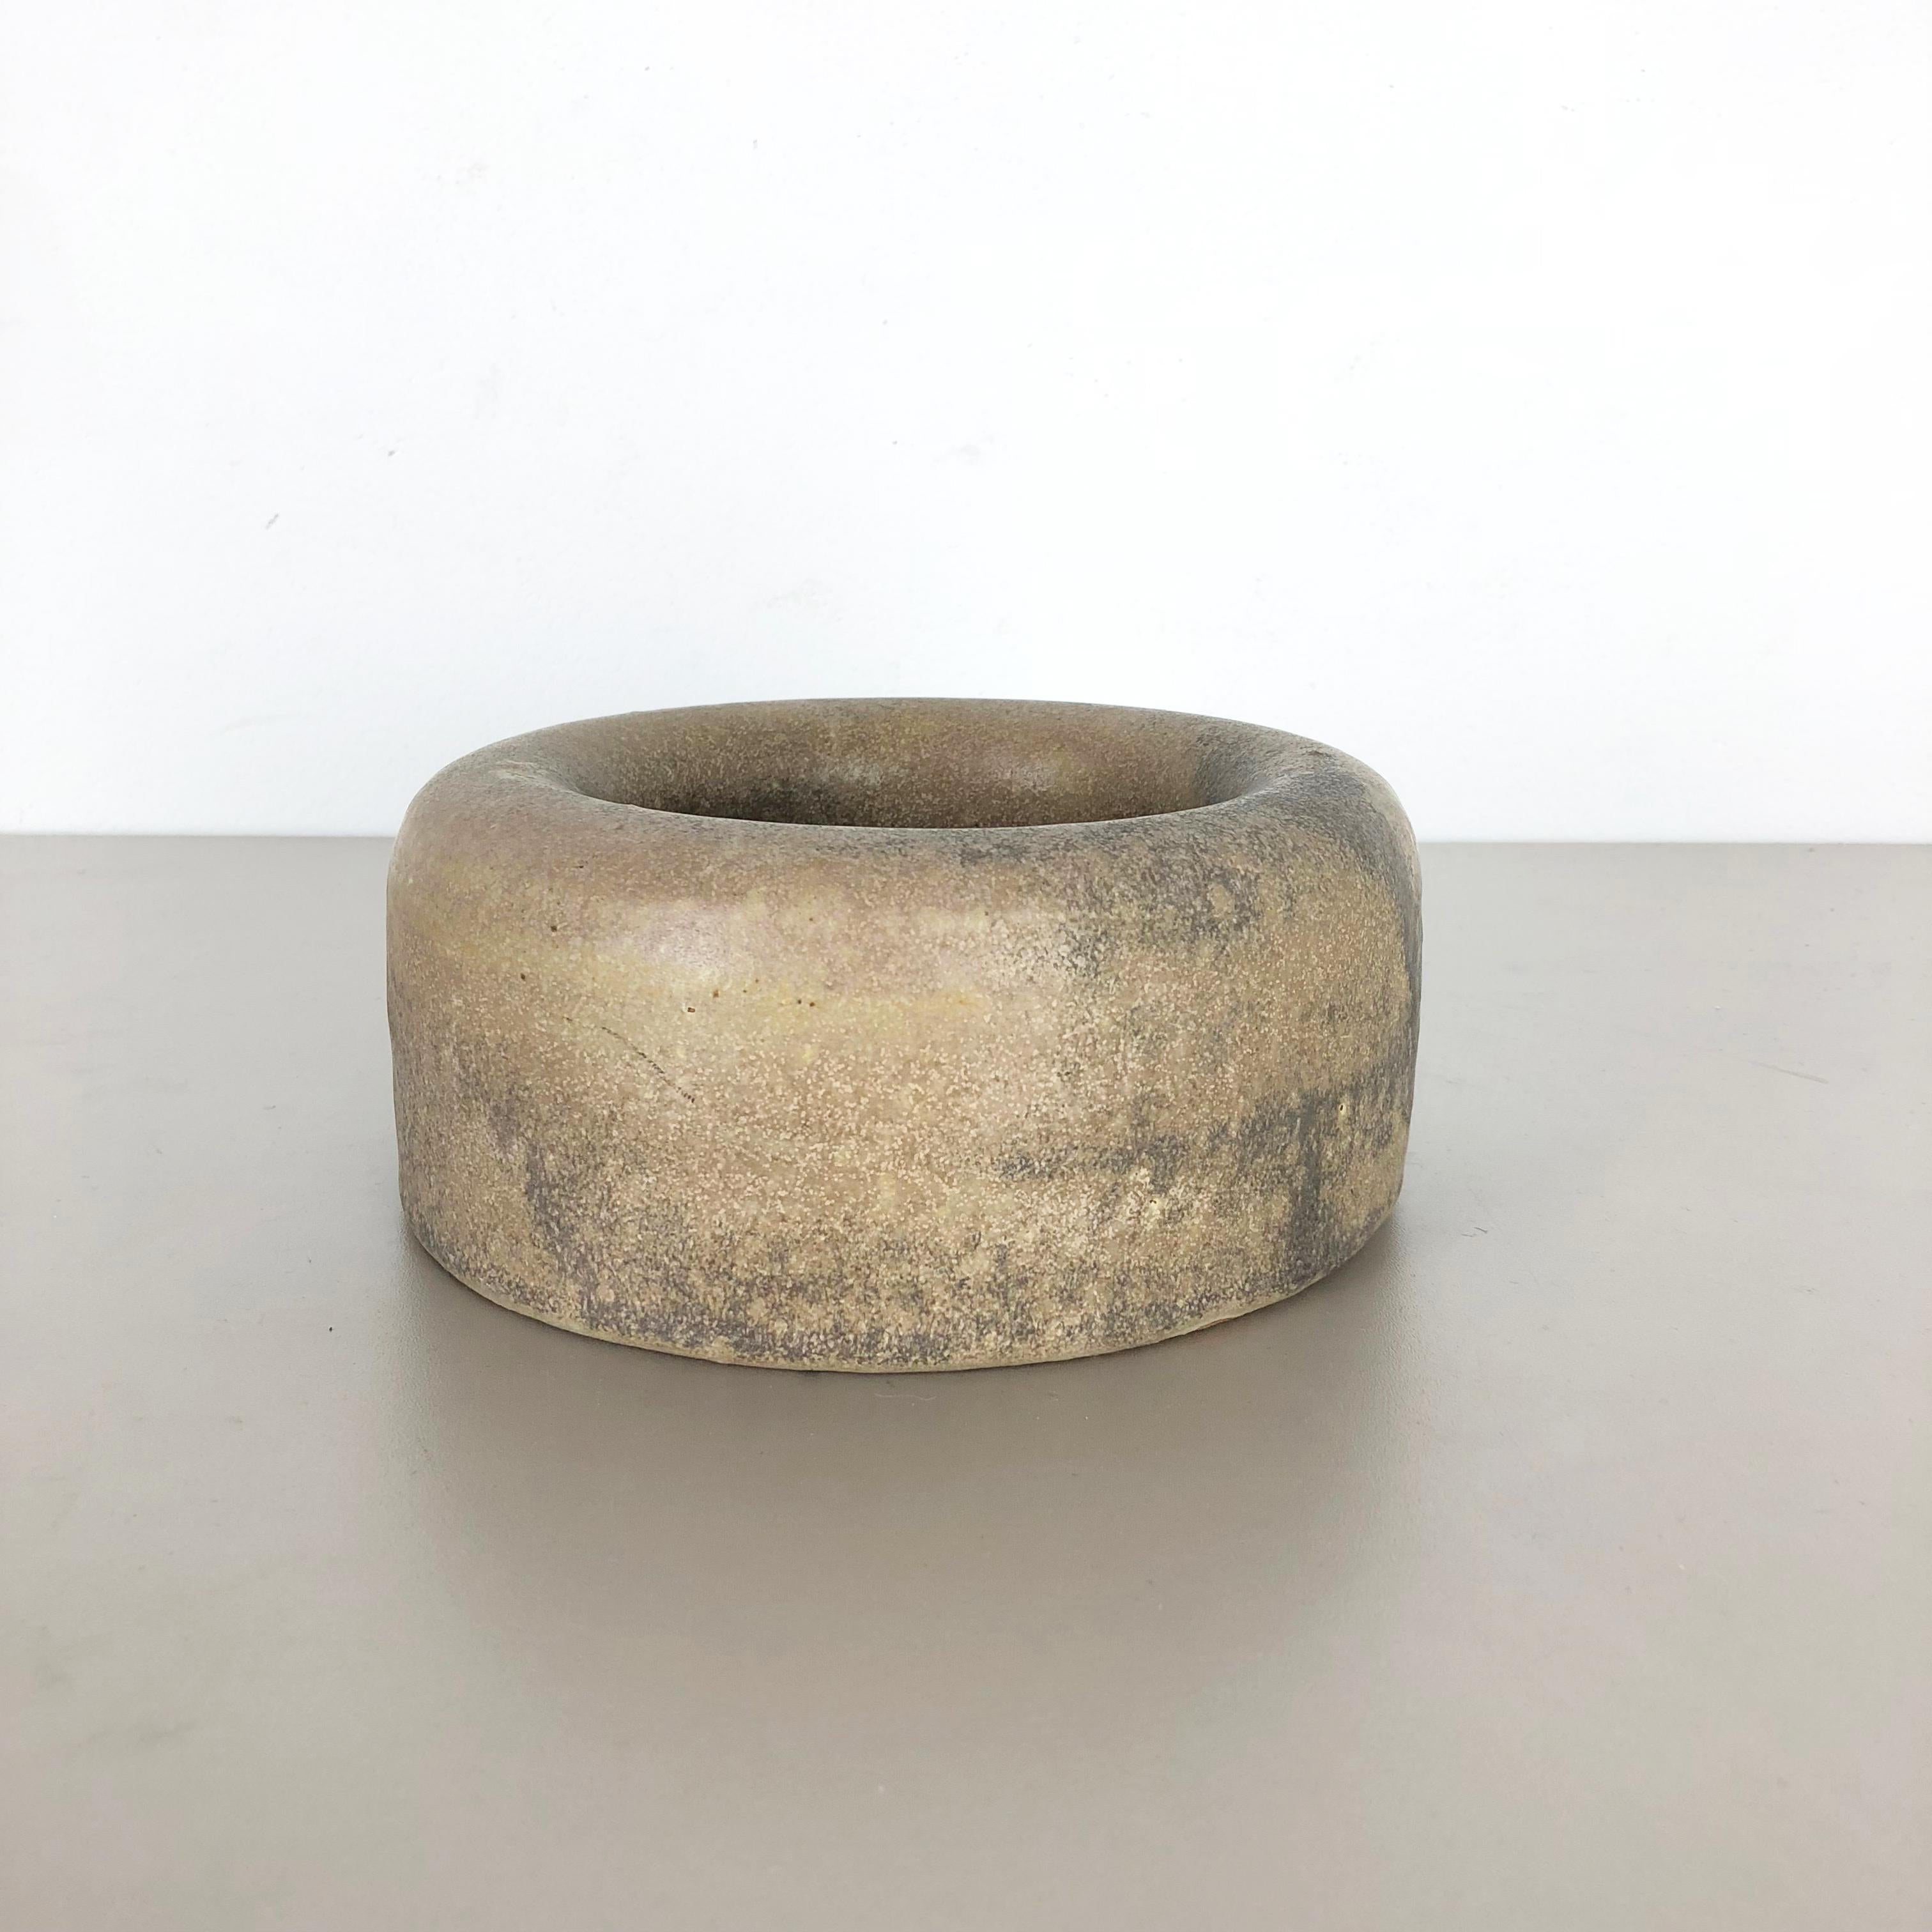 Article:

Ceramic shell bowl


Producer:

Mobach, Netherlands


Designer:

Piet Knepper




Decade:

1960-1965





This original vintage Studio Pottery was produced in the 1960s by Piet Knepper for Mobach in Utrecht,